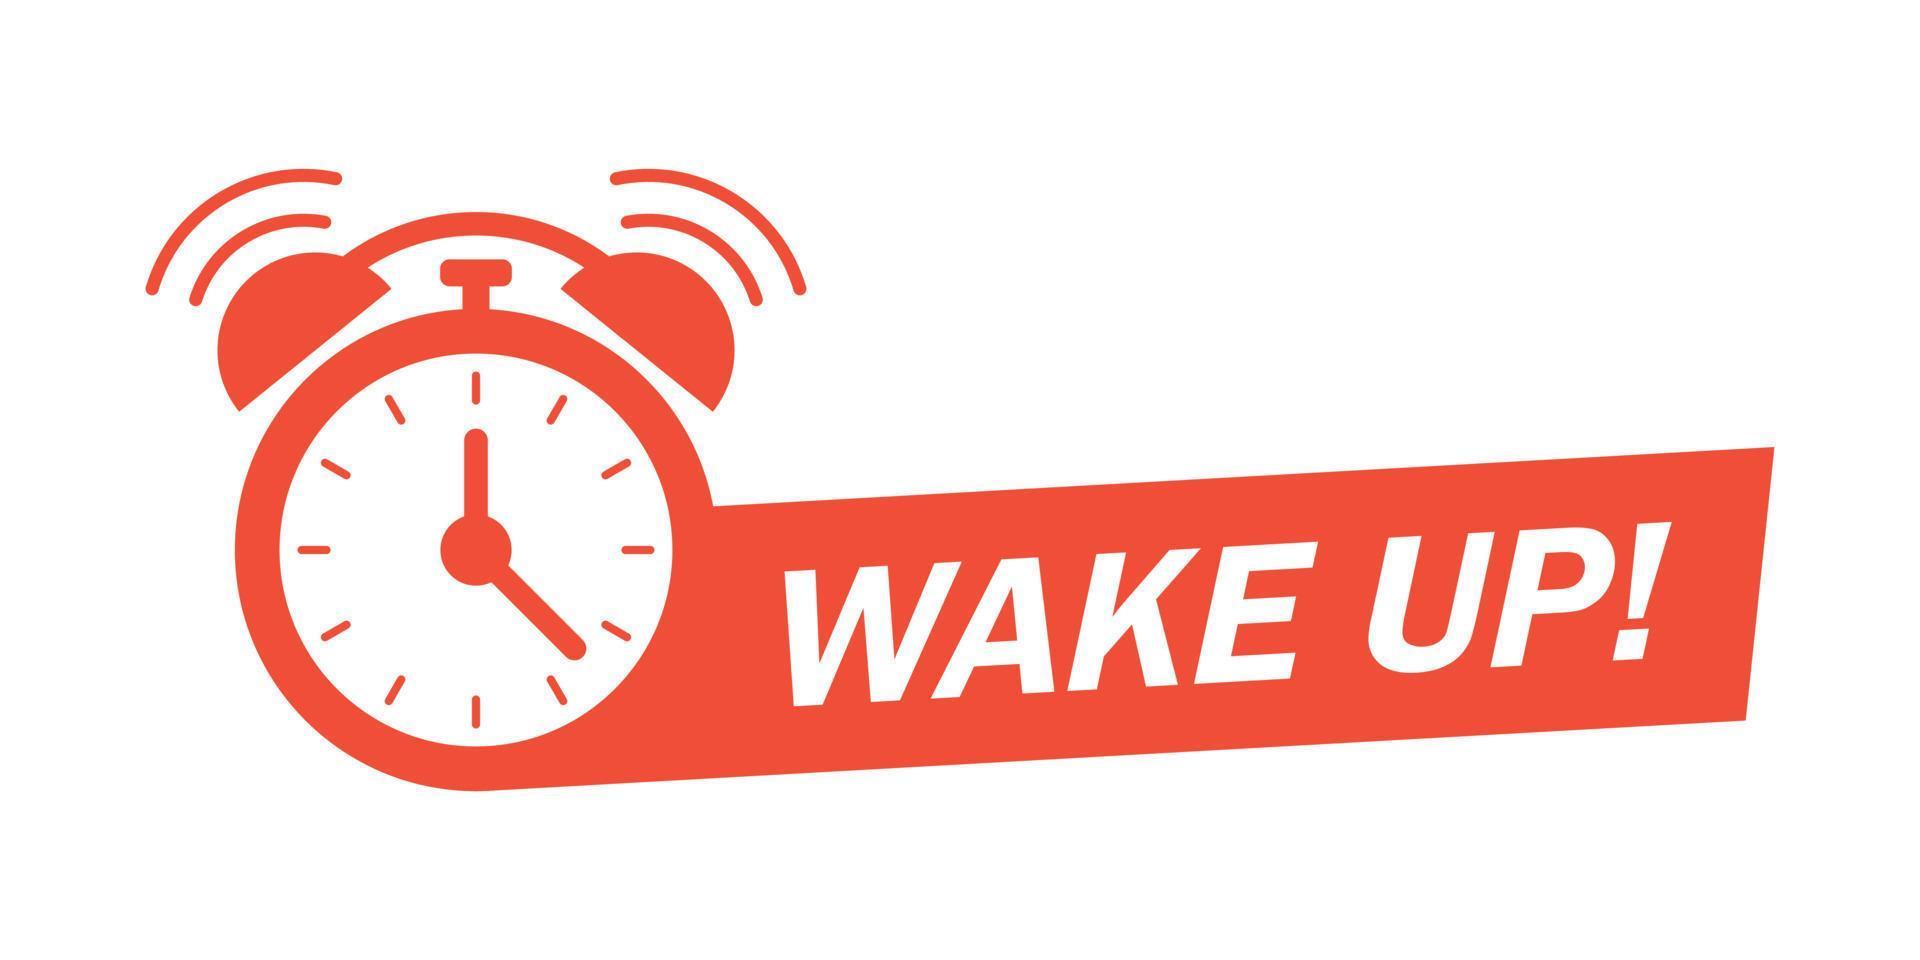 Wake up icon in flat style. Good morning vector illustration on isolated background. Alarm clock ringing and mornings wakes sign business concept.